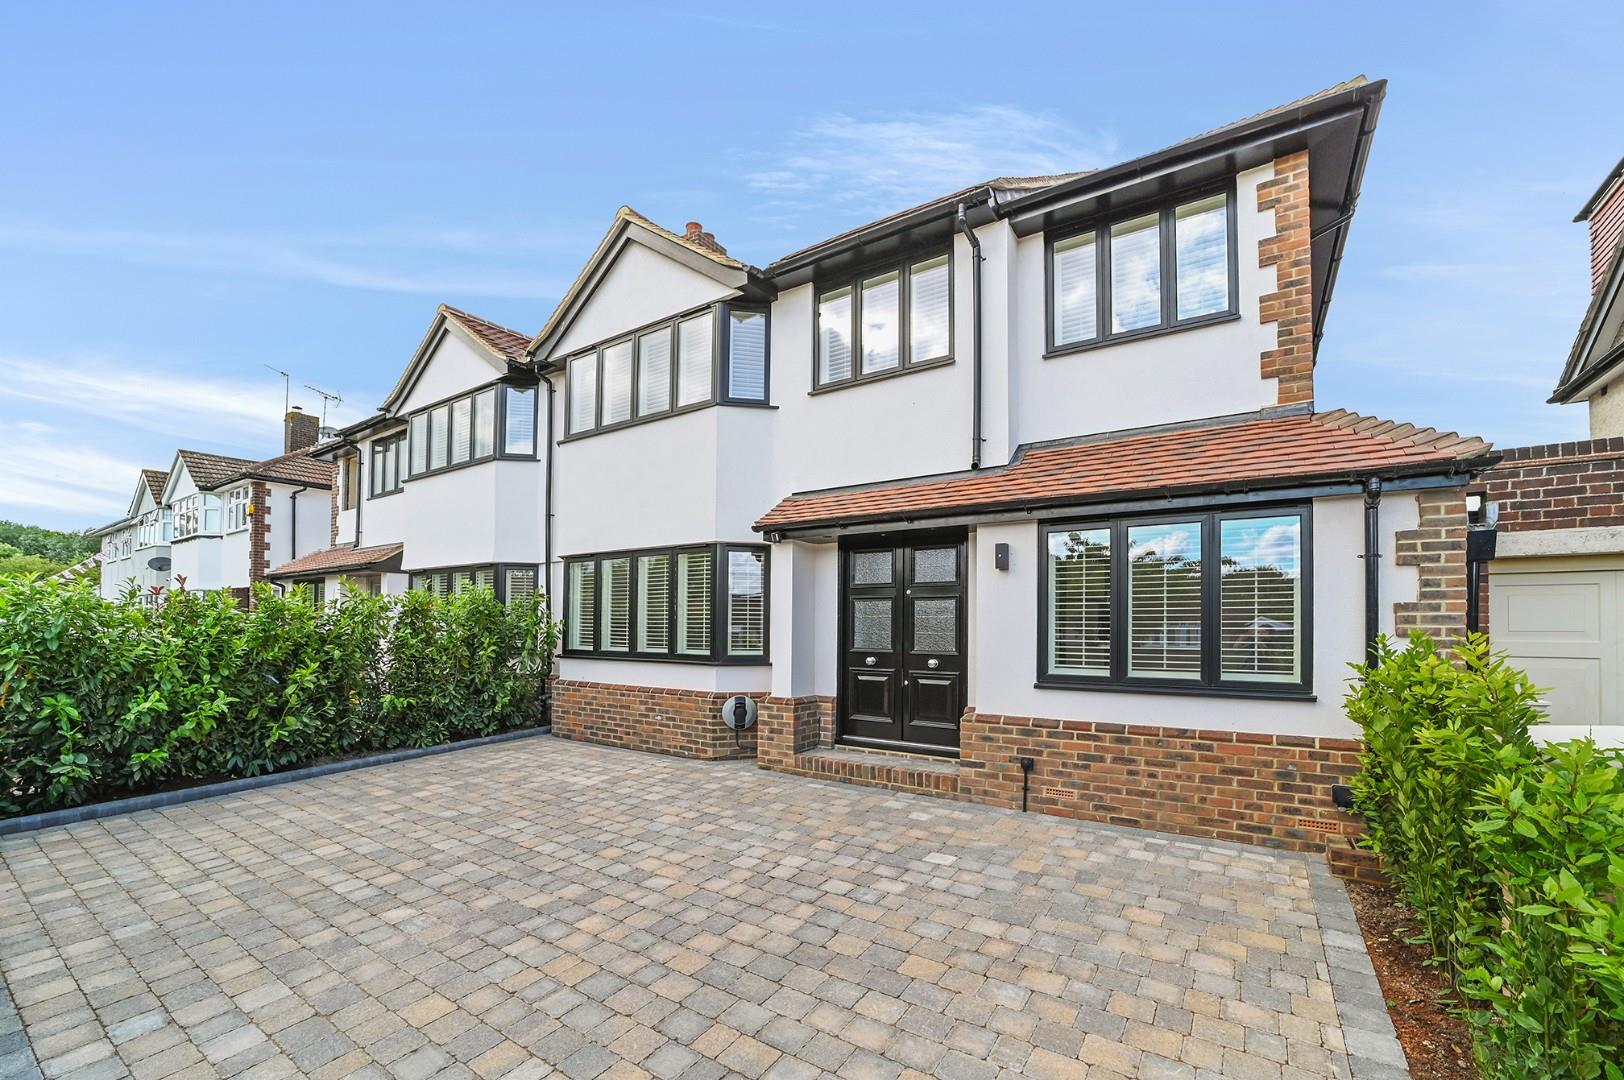 Similar Property: House - Semi-Detached in Essex